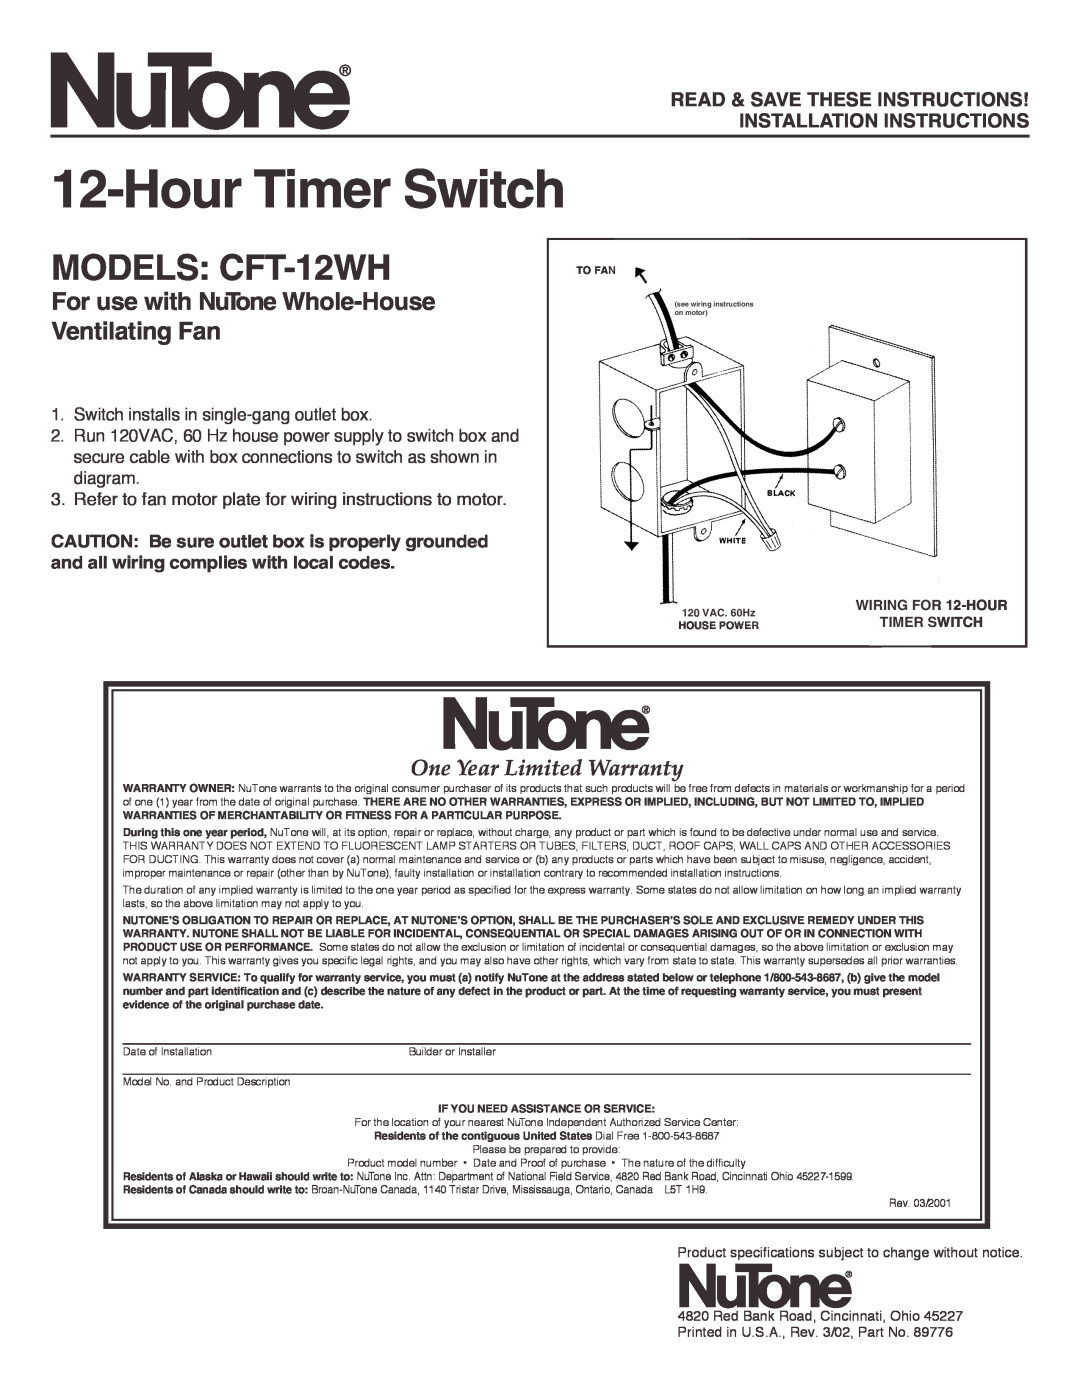 NuTone warranty Hour Timer Switch, MODELS CFT-12WH, For use with NuTone Whole-House Ventilating Fan 